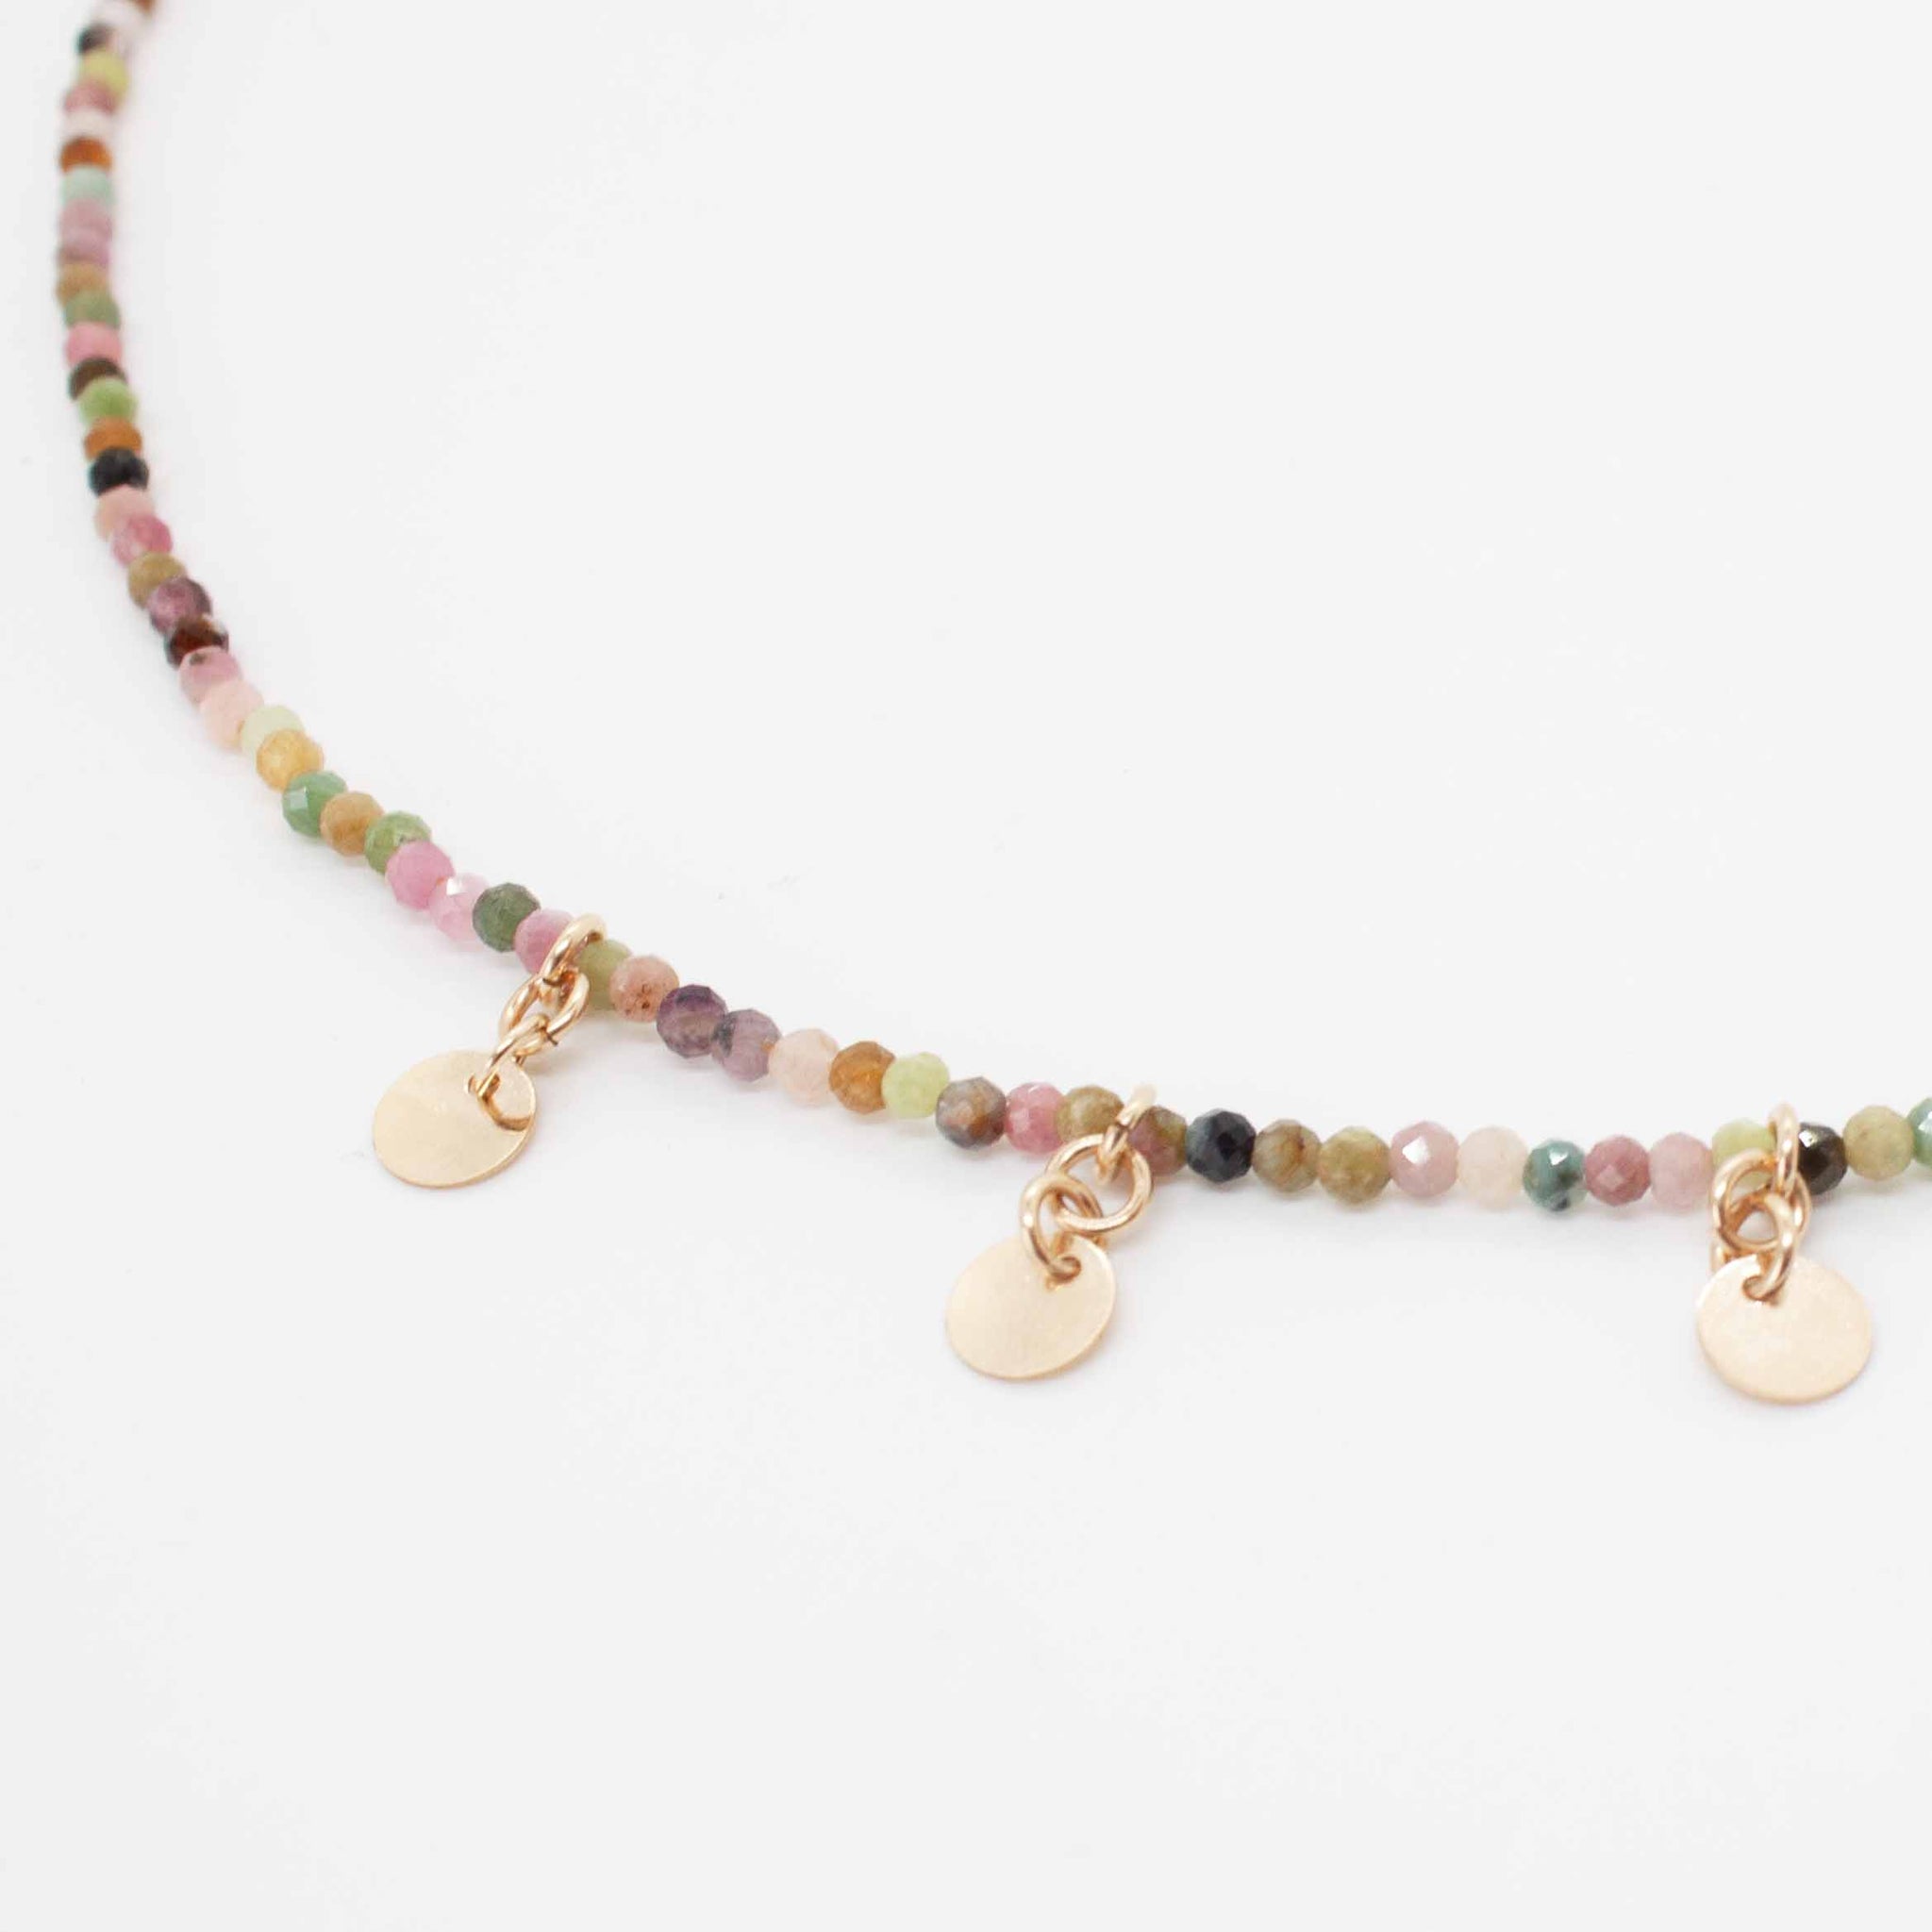 For LOVE of shimmering colour. 16" long (adjustable to 18") beaded rainbow tourmaline with gold disc charms. Handmade in Toronto kp jewelry co.